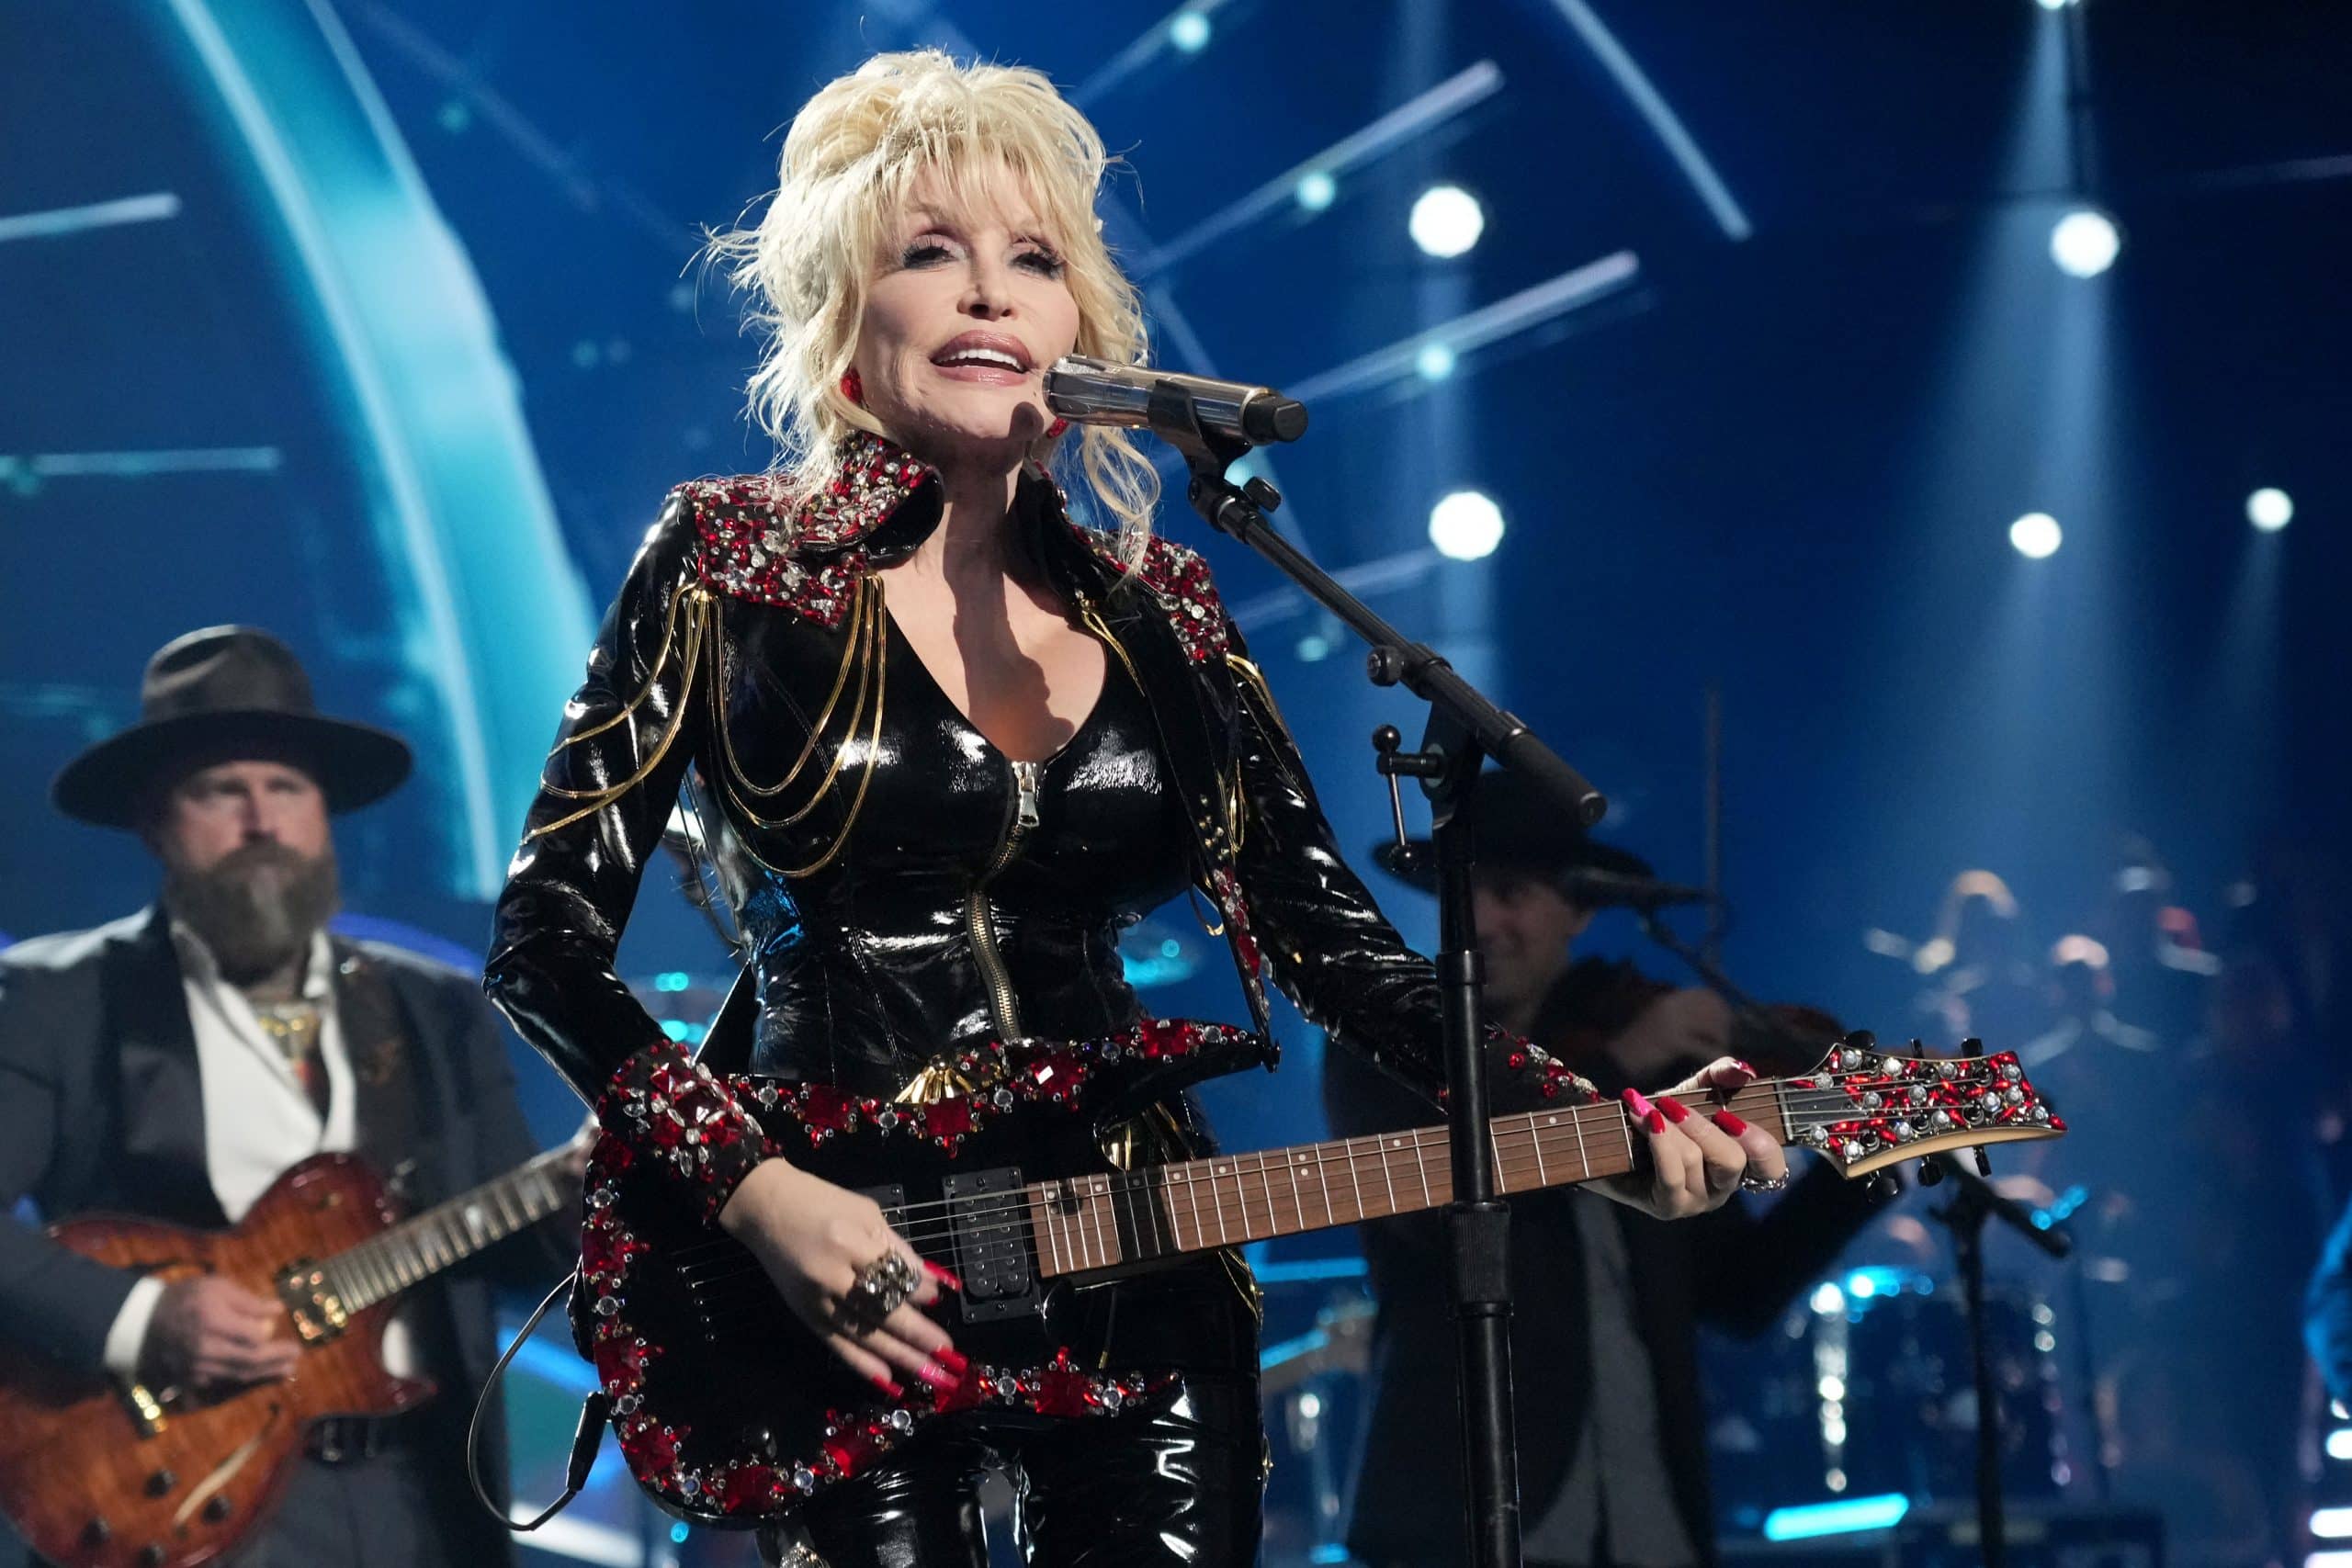 Dolly Parton is a country artist in the Rock & Roll Hall of Fame